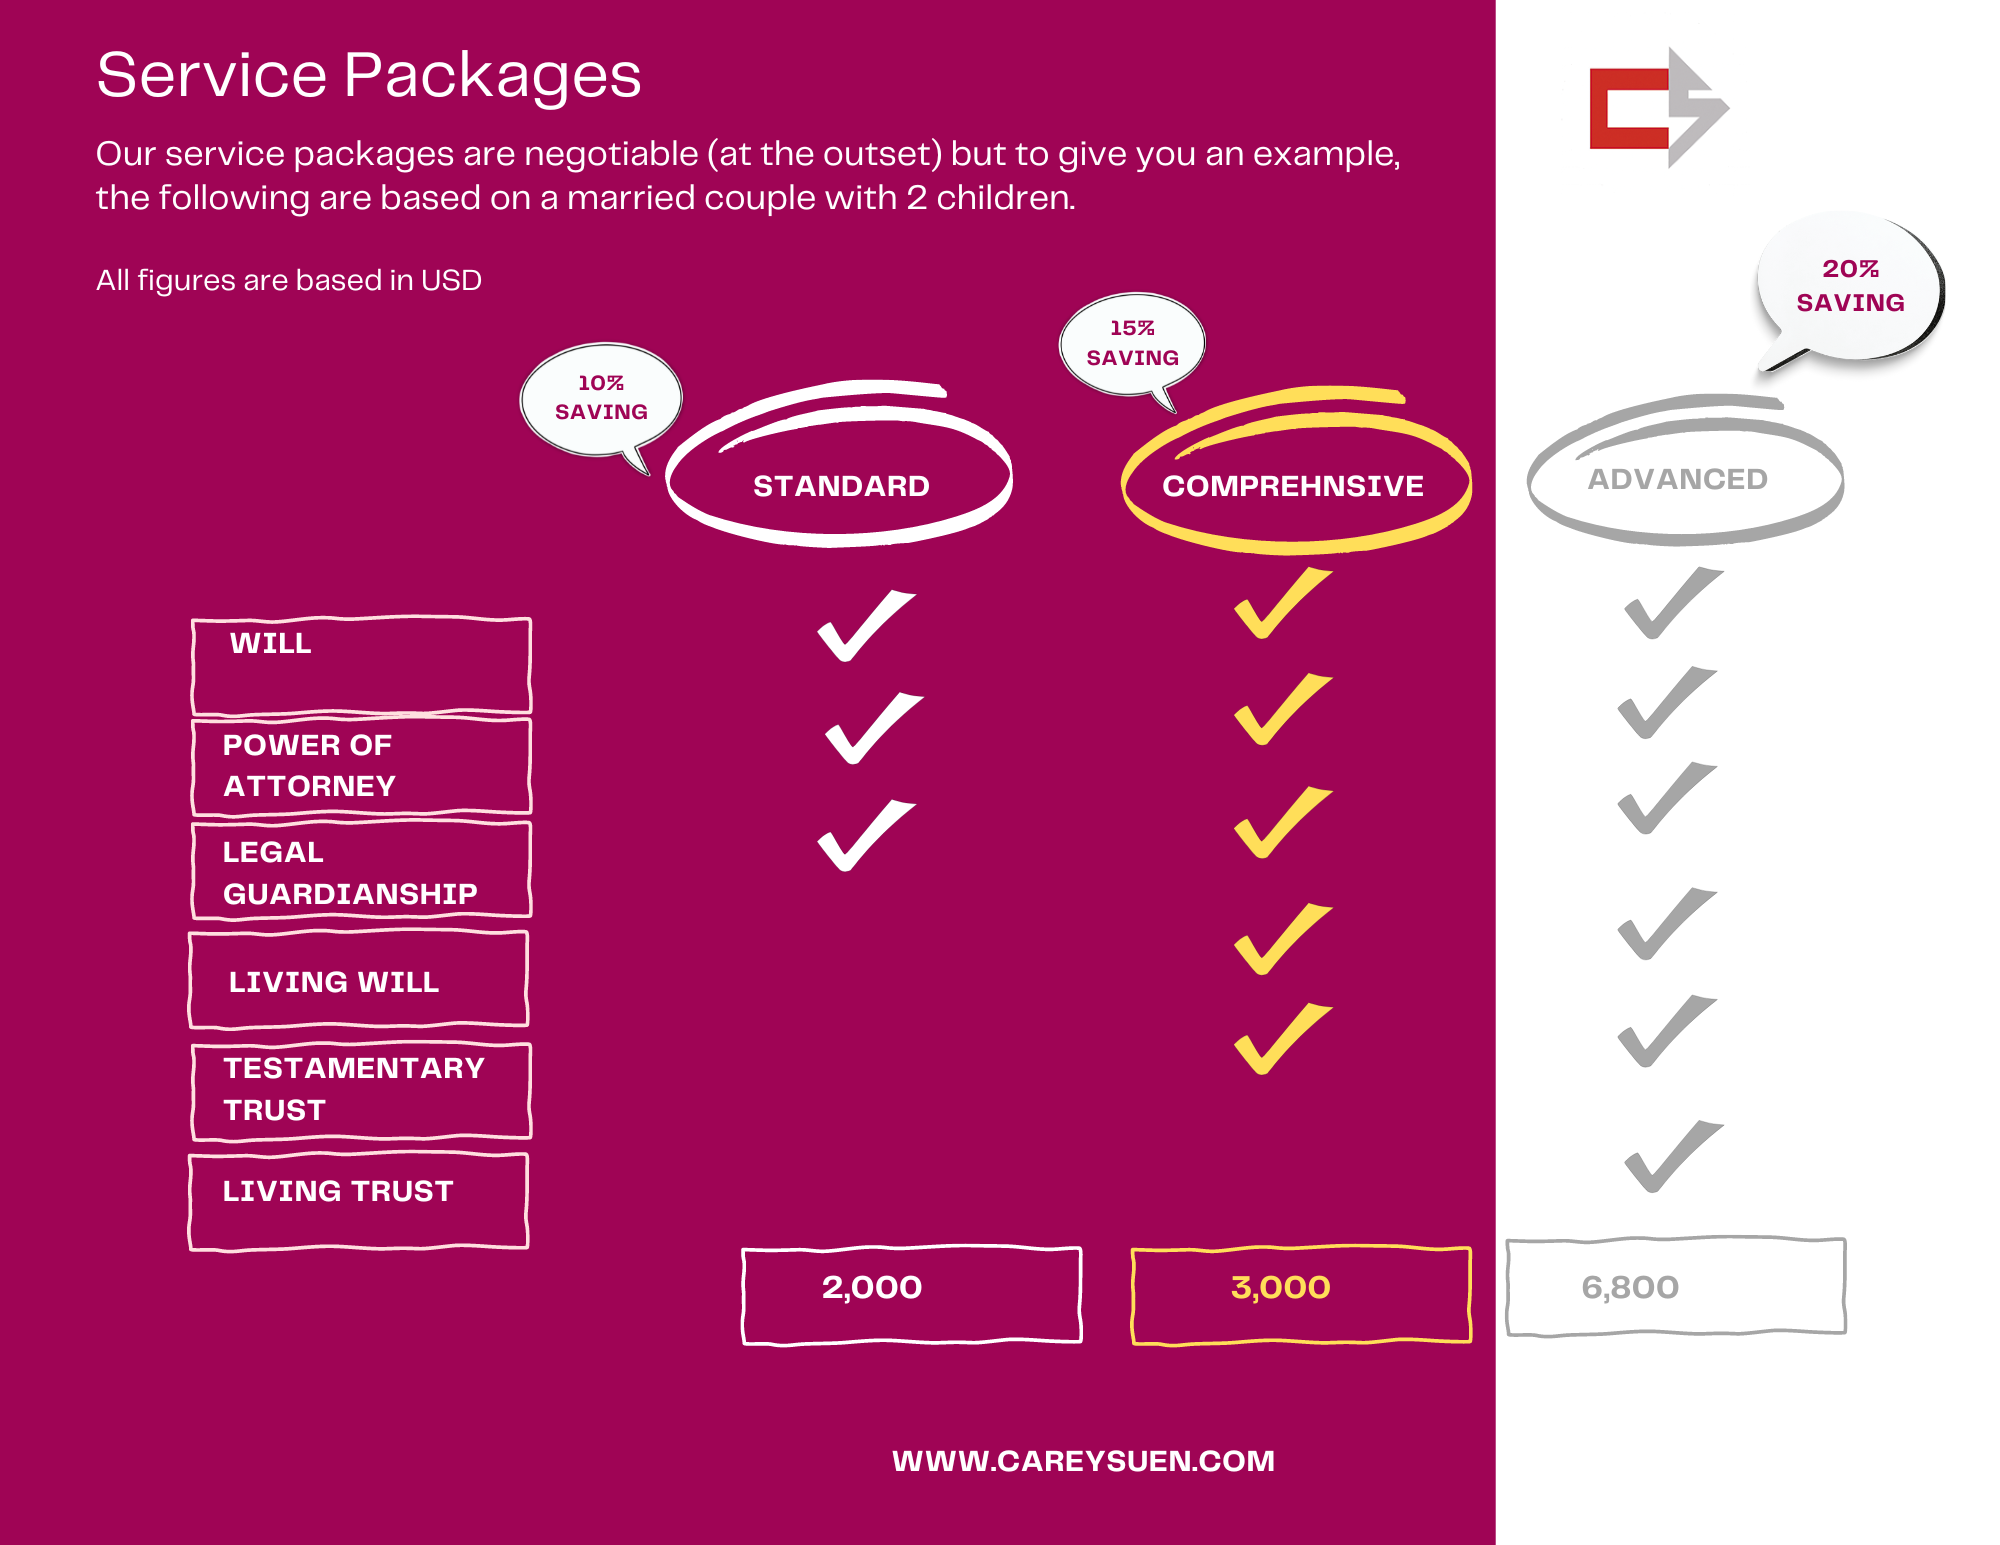 Service Packages